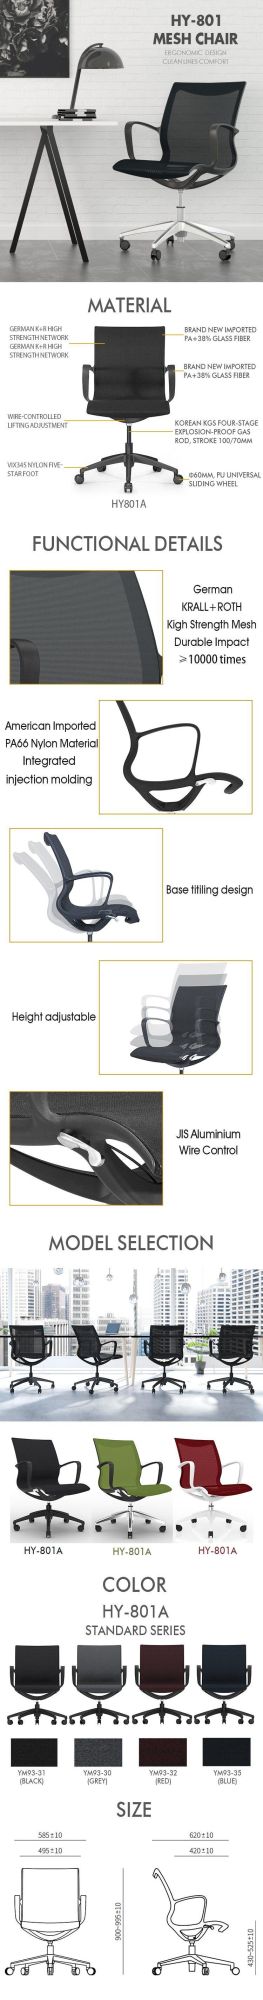 Chinese Factory Office Luxury Director Executive Office Chairs High Back